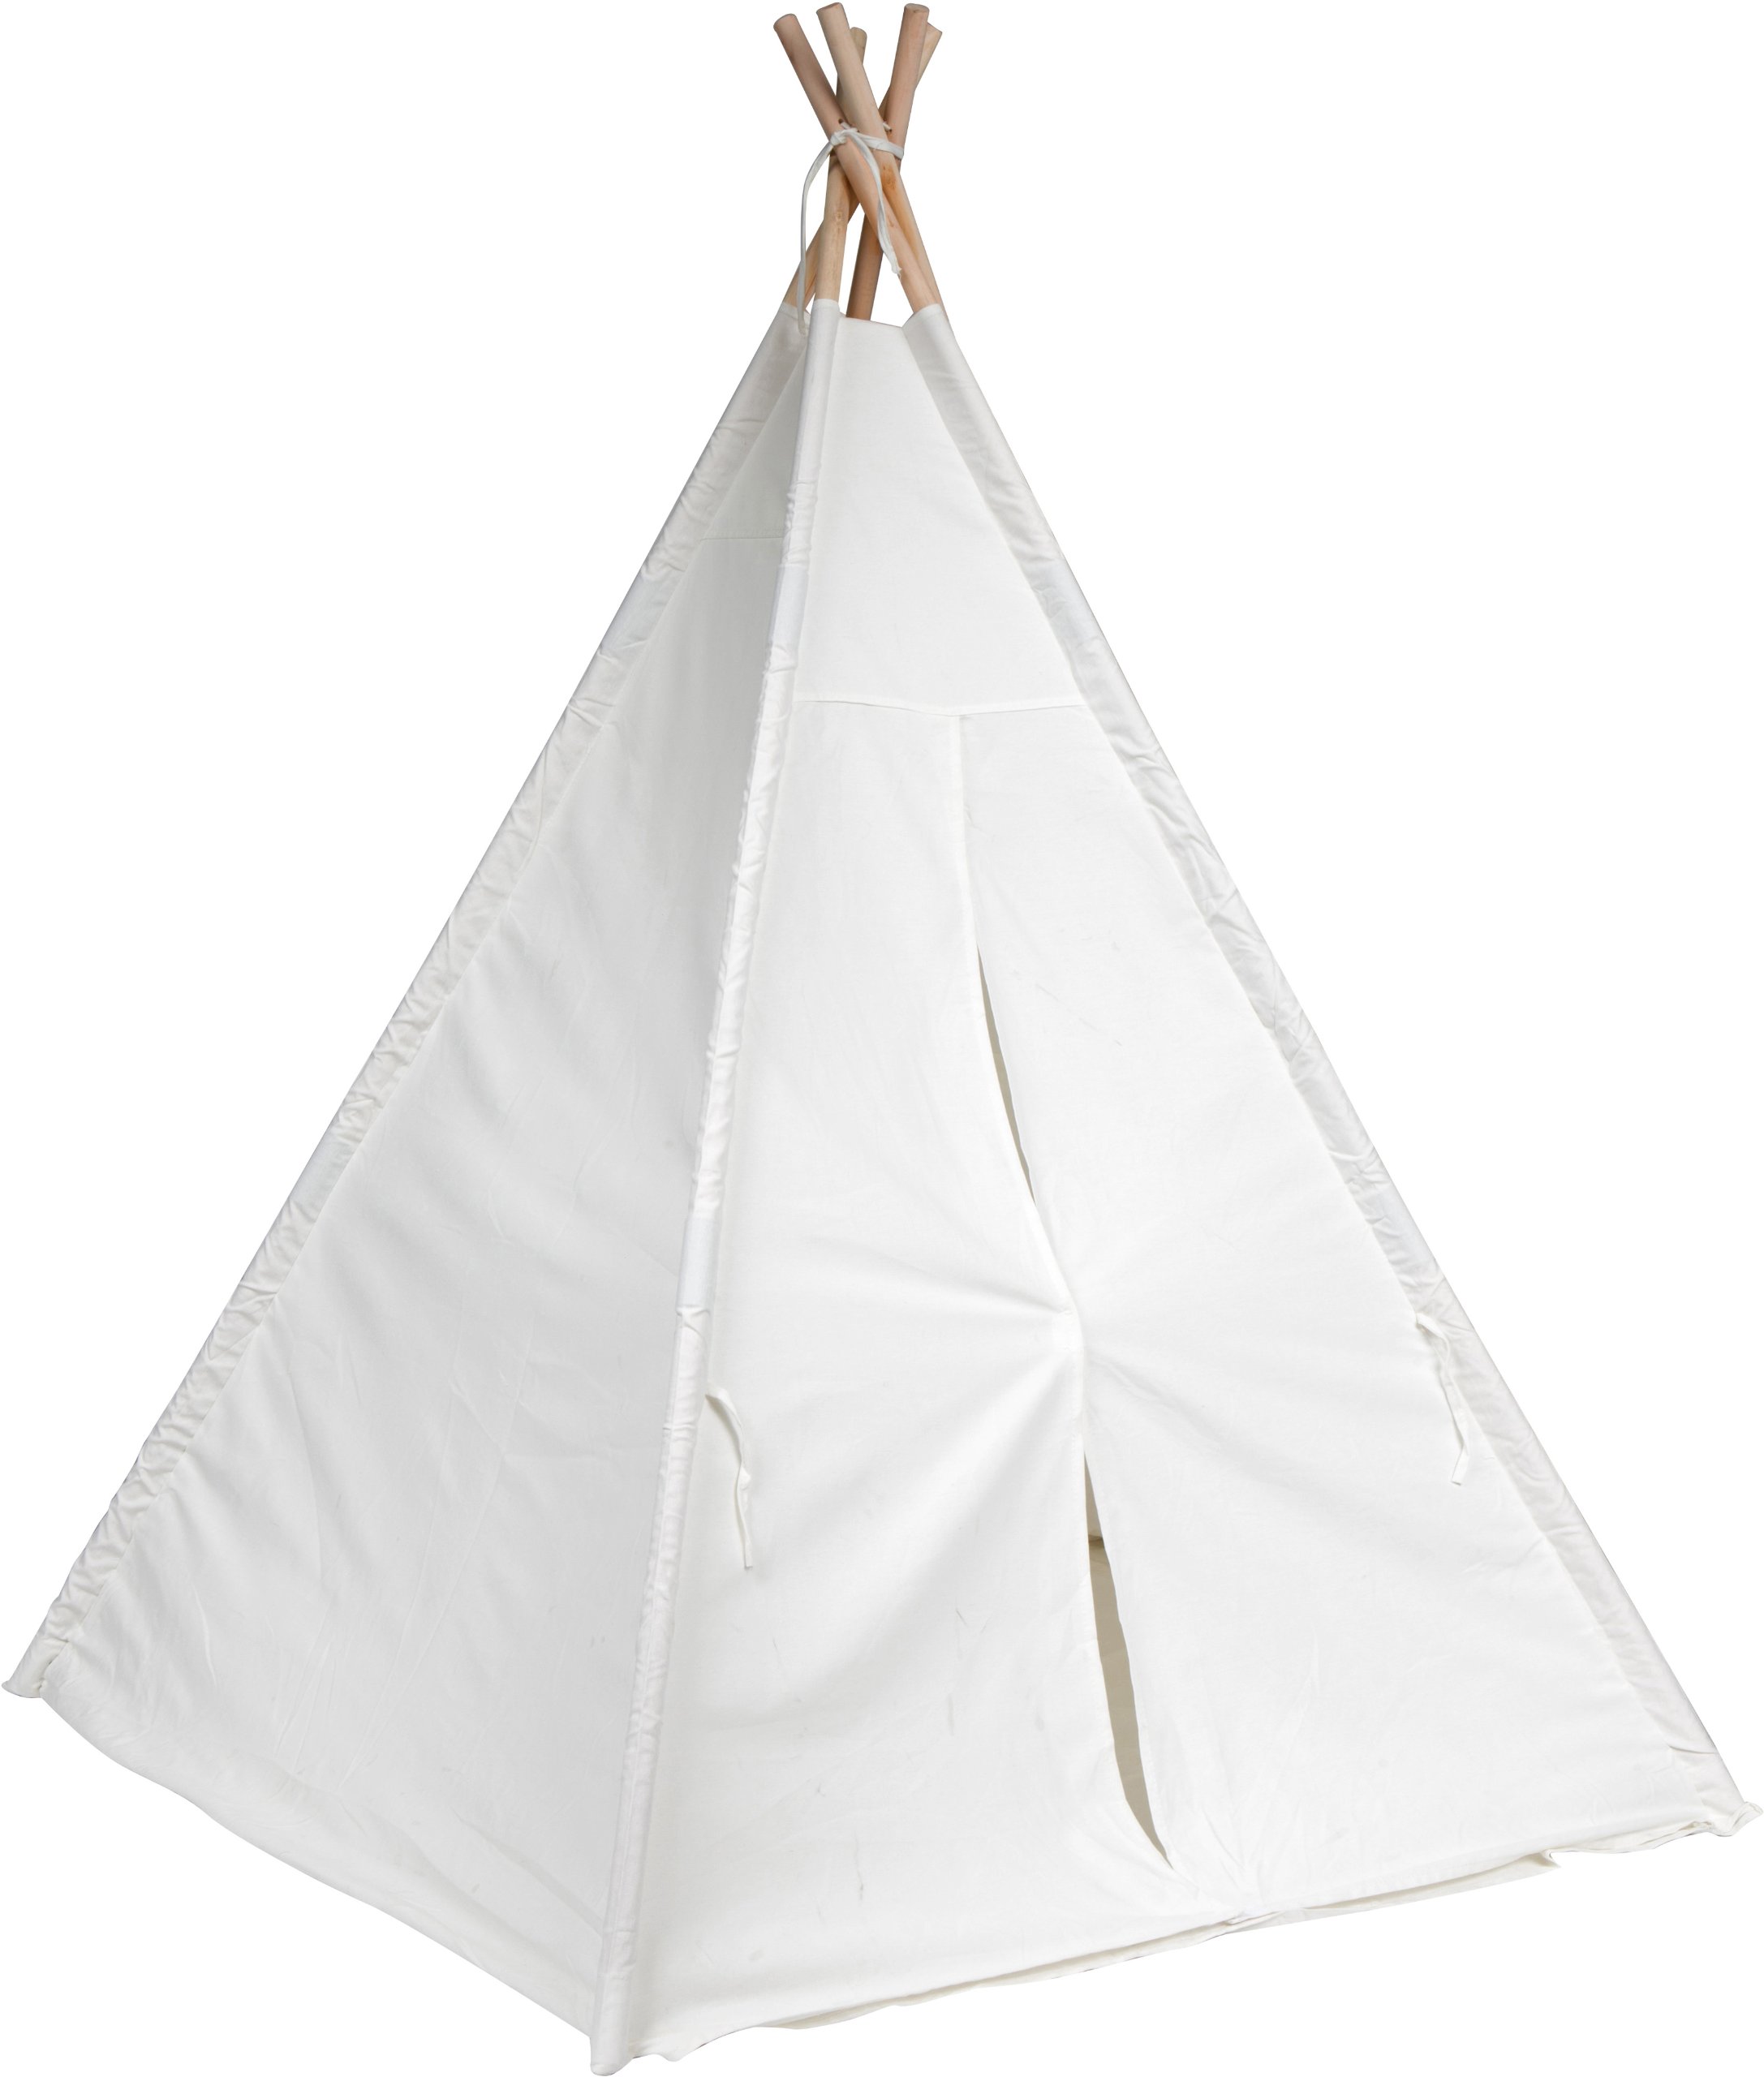 6' Giant Teepee Play House of Pine Wood with Carry Case by Trademark Innovations (White)